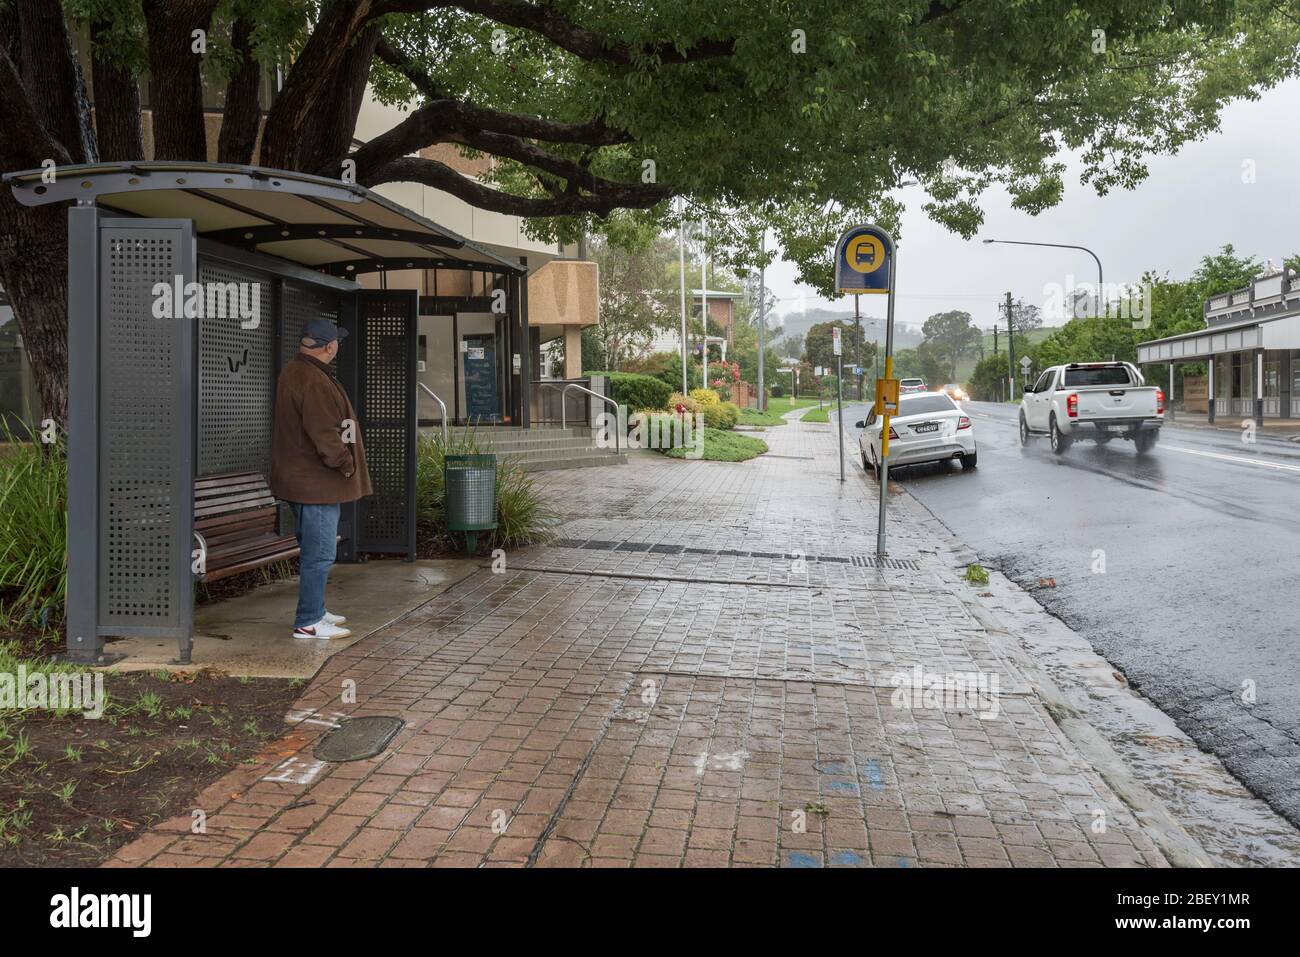 On a rainy day a man stands and waits at a bus stop in the regional town of Picton, New South Wales, Australia Stock Photo